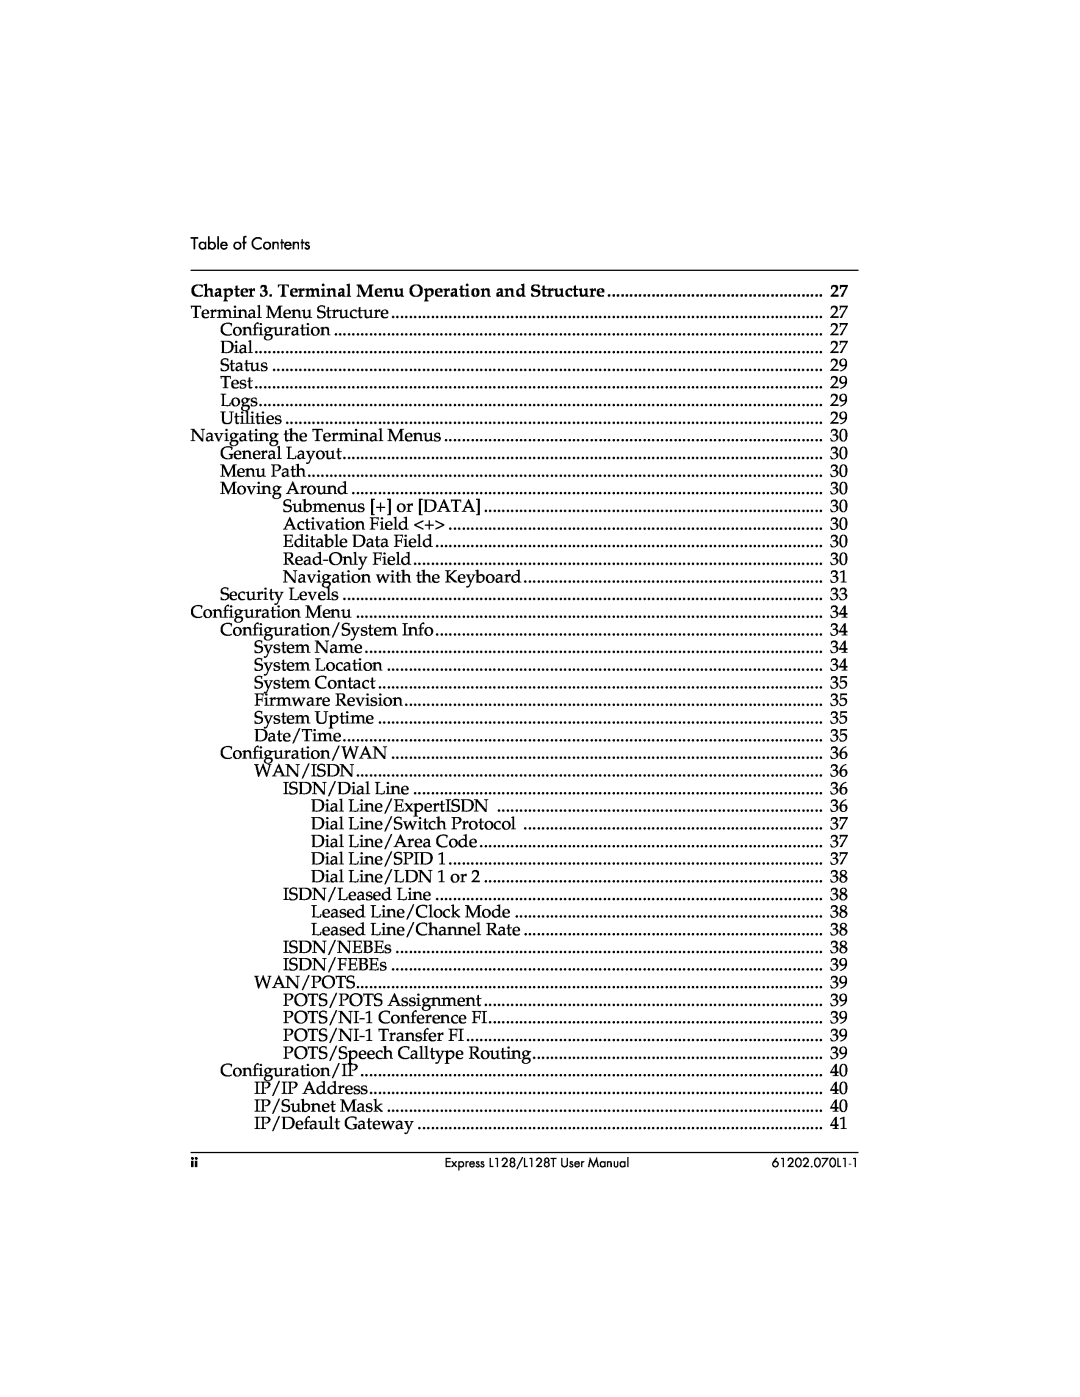 ADTRAN L128T user manual Table of Contents, Terminal Menu Operation and Structure 